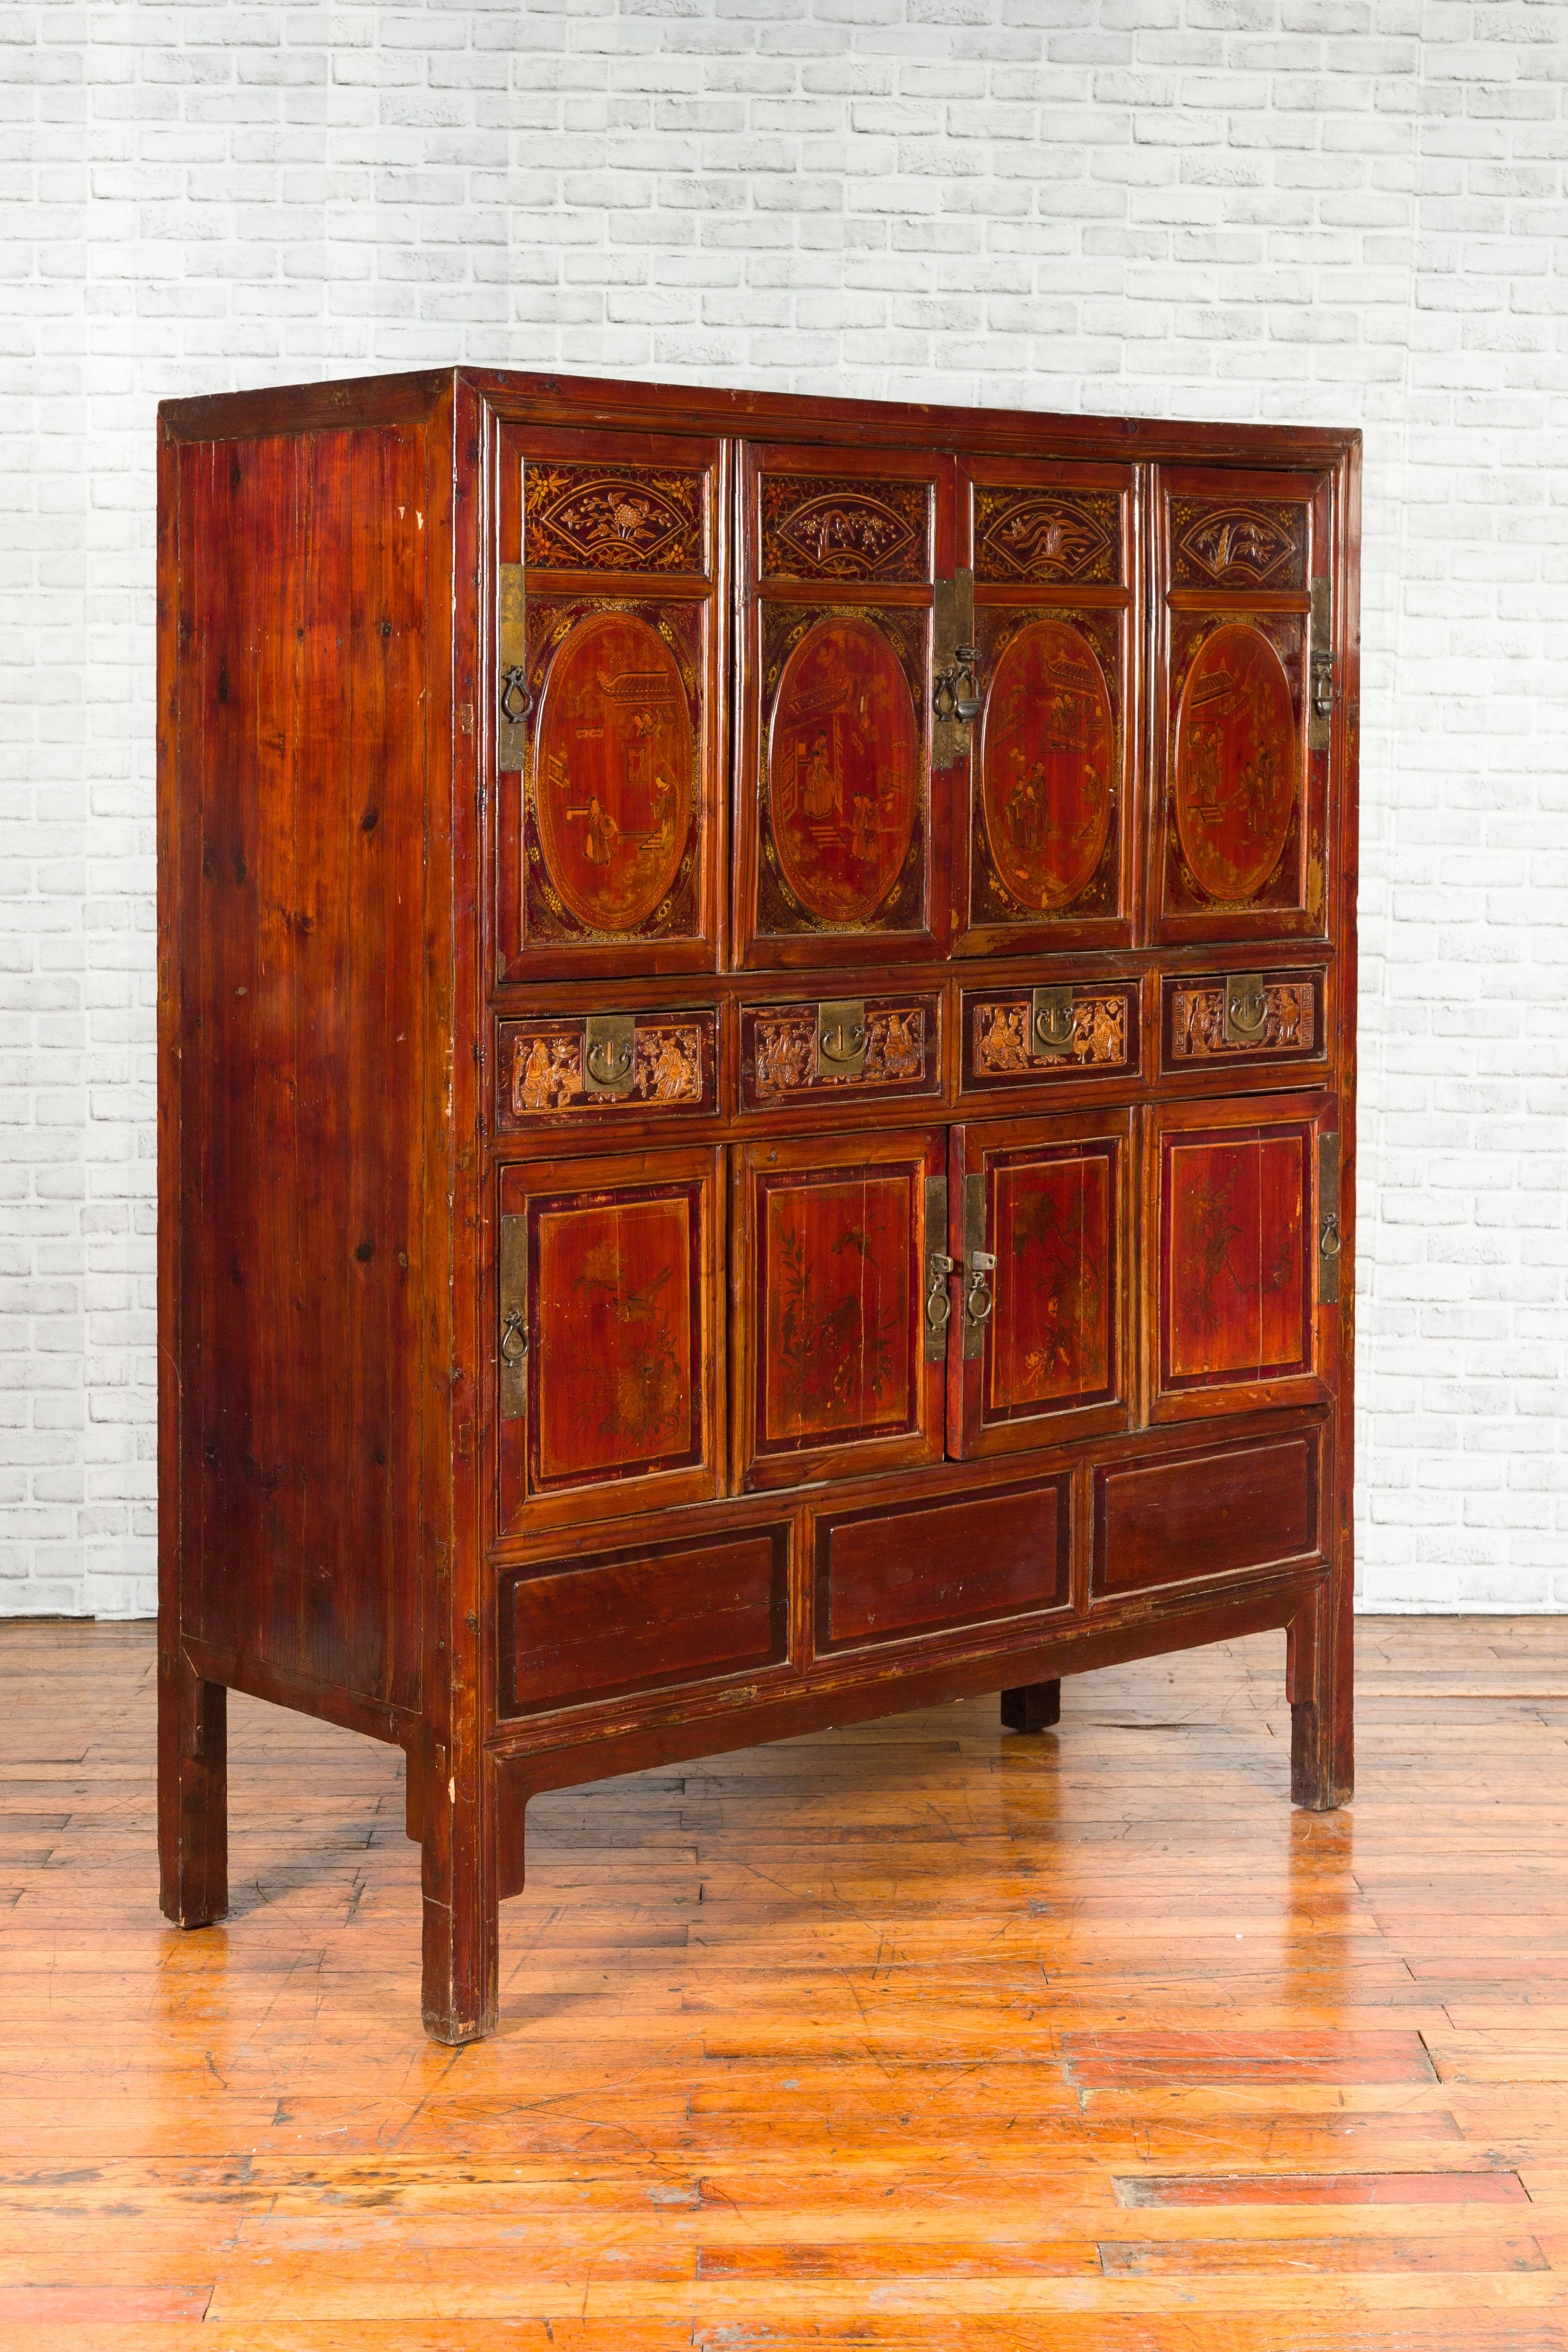 A Chinese Qing Dynasty red cabinet from the 19th century, with oval hand painted medallions and hand carved motifs. Created in China during the 19th century, this Qing cabinet features a linear silhouette perfectly complimented by subtly contrasting